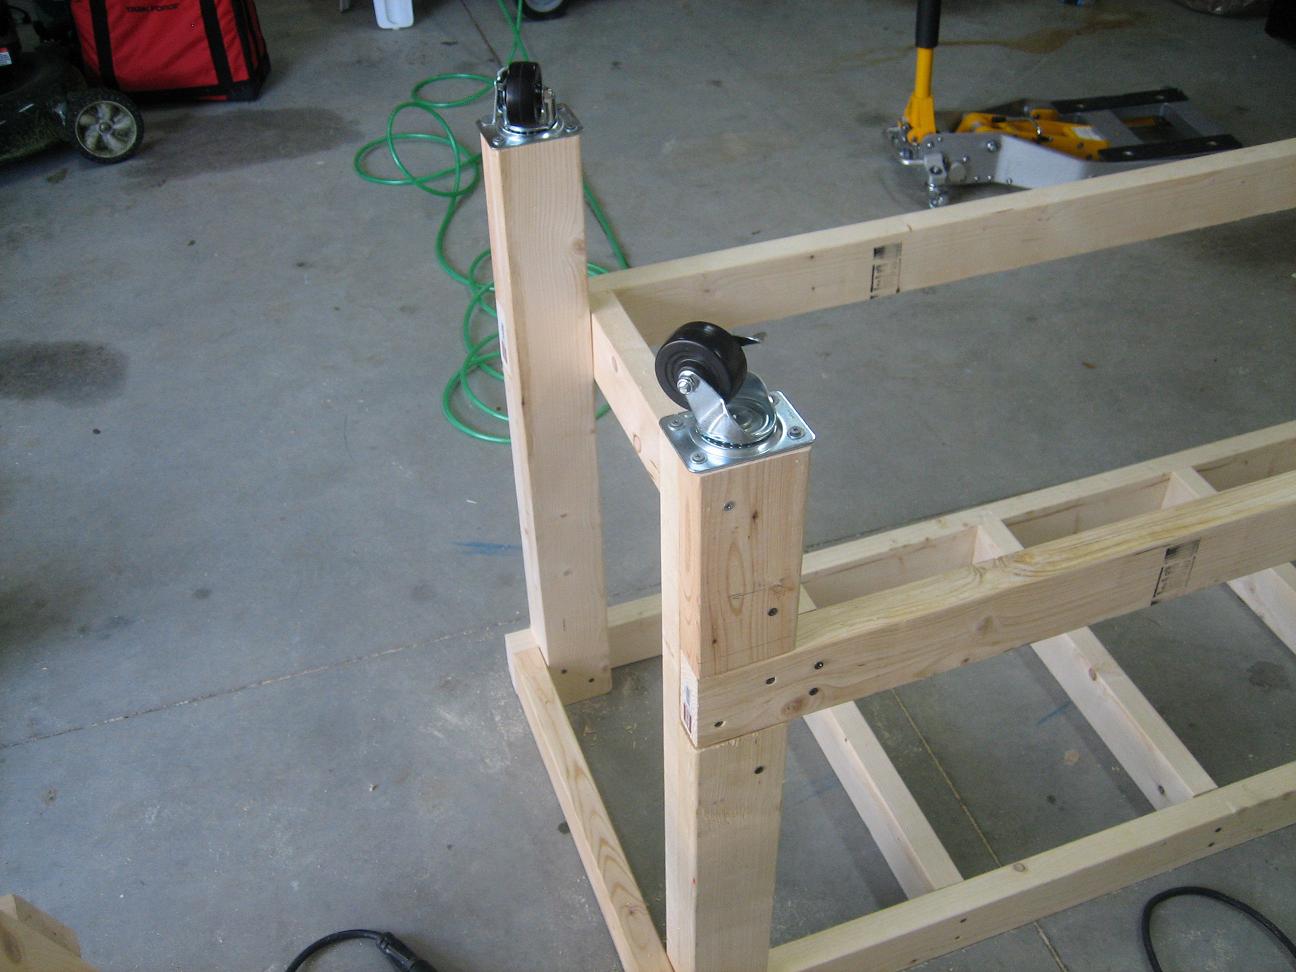 Ultimate workbench plans download free Plans DIY How to 